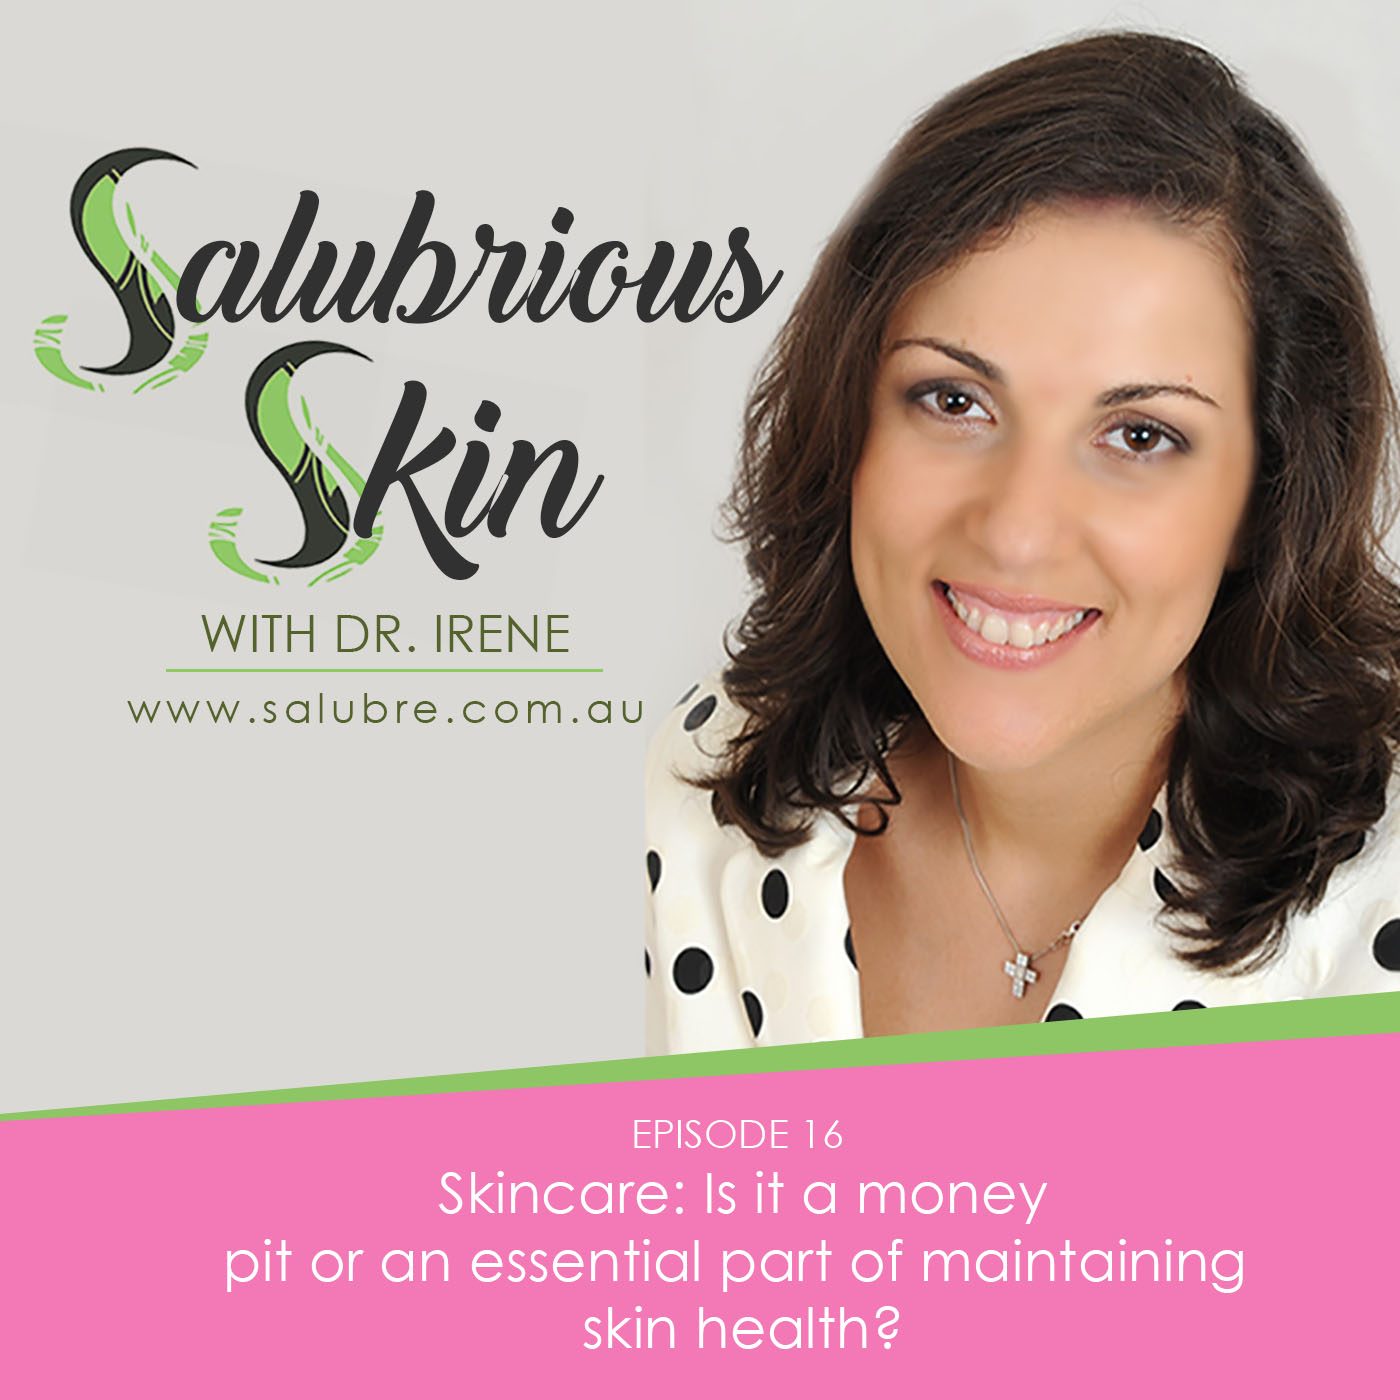 Episode 16: Skincare: Is it a money pit or an essential part of maintaining skin health?